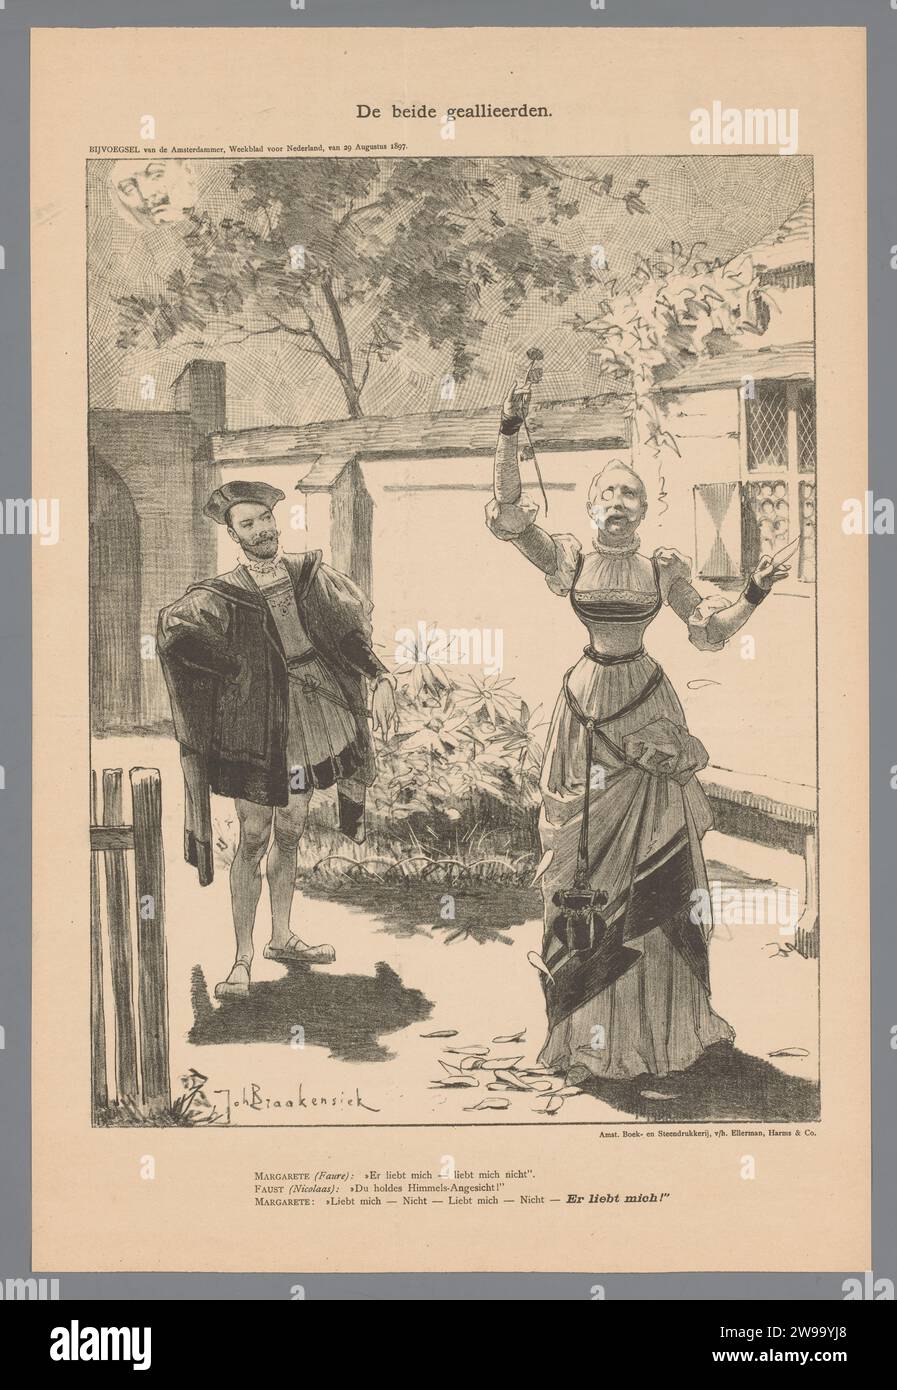 Both Allies, Johan Braakensiek, 1897   Amsterdam paper  historical persons. political caricatures and satires. alliance, league, union, foedus. names of literary characters. female literary characters. (scenes from) specific works of literature: Goethe, Faust Stock Photo